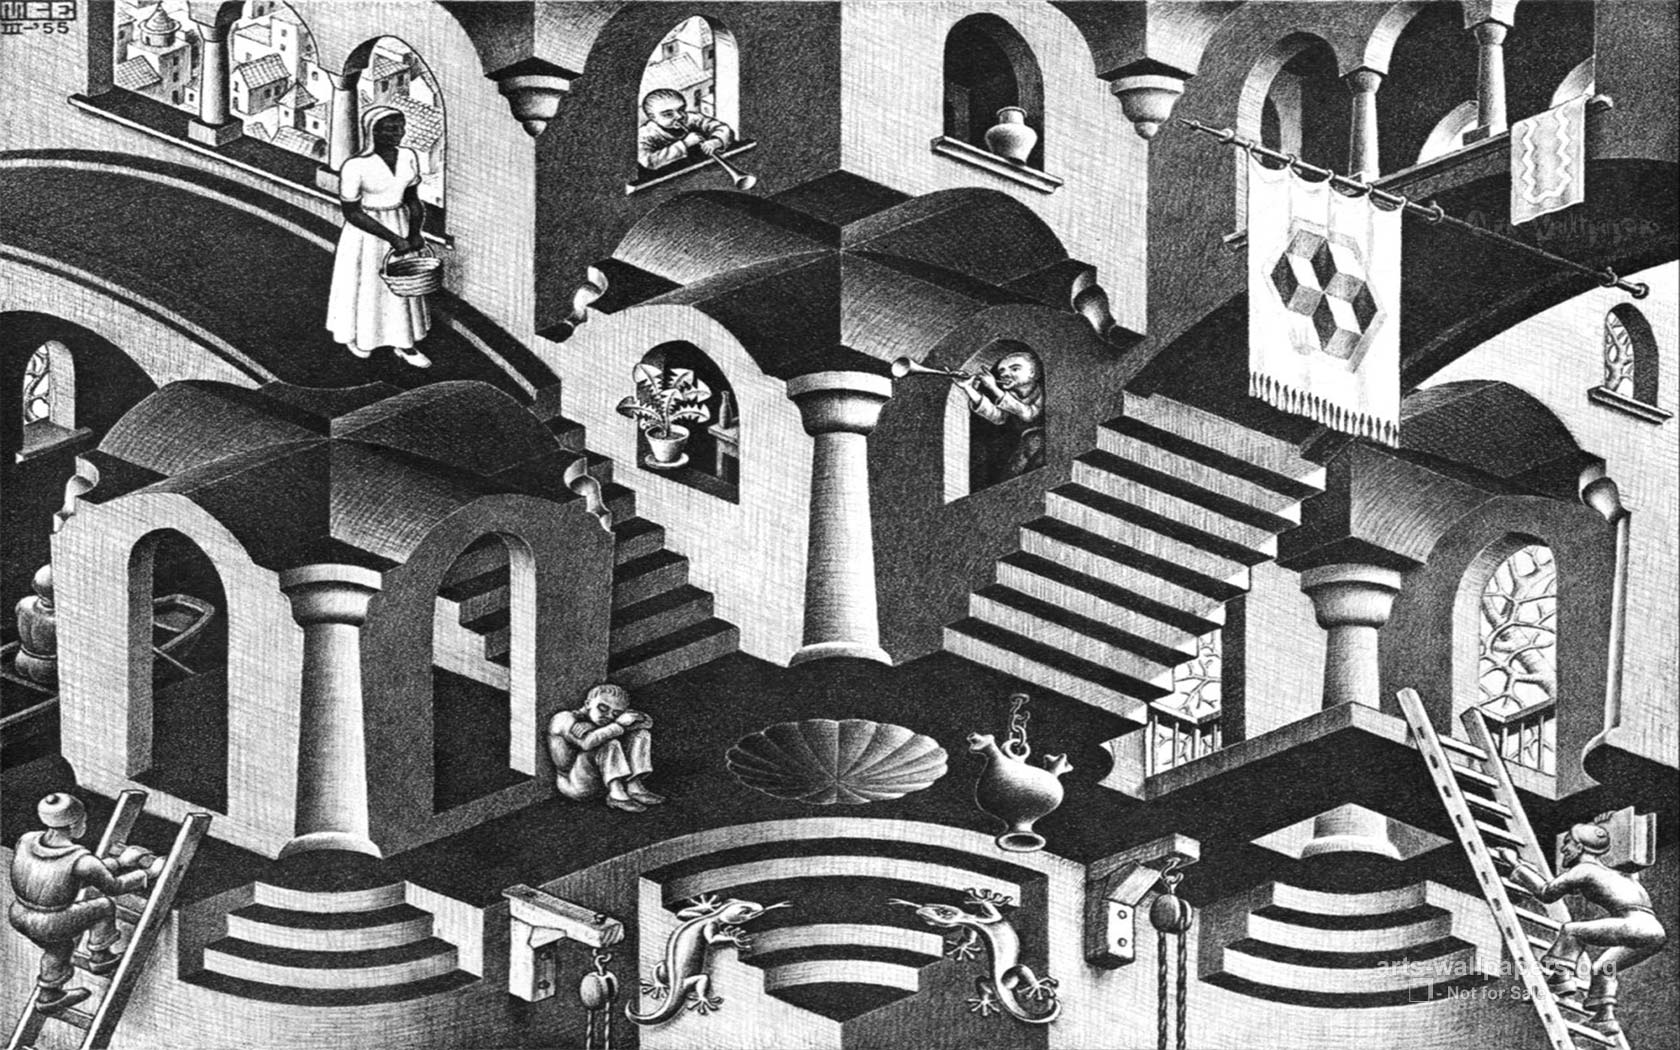 House of Stairs is a lithograph print by the Dutch artist M C Escher  which was first